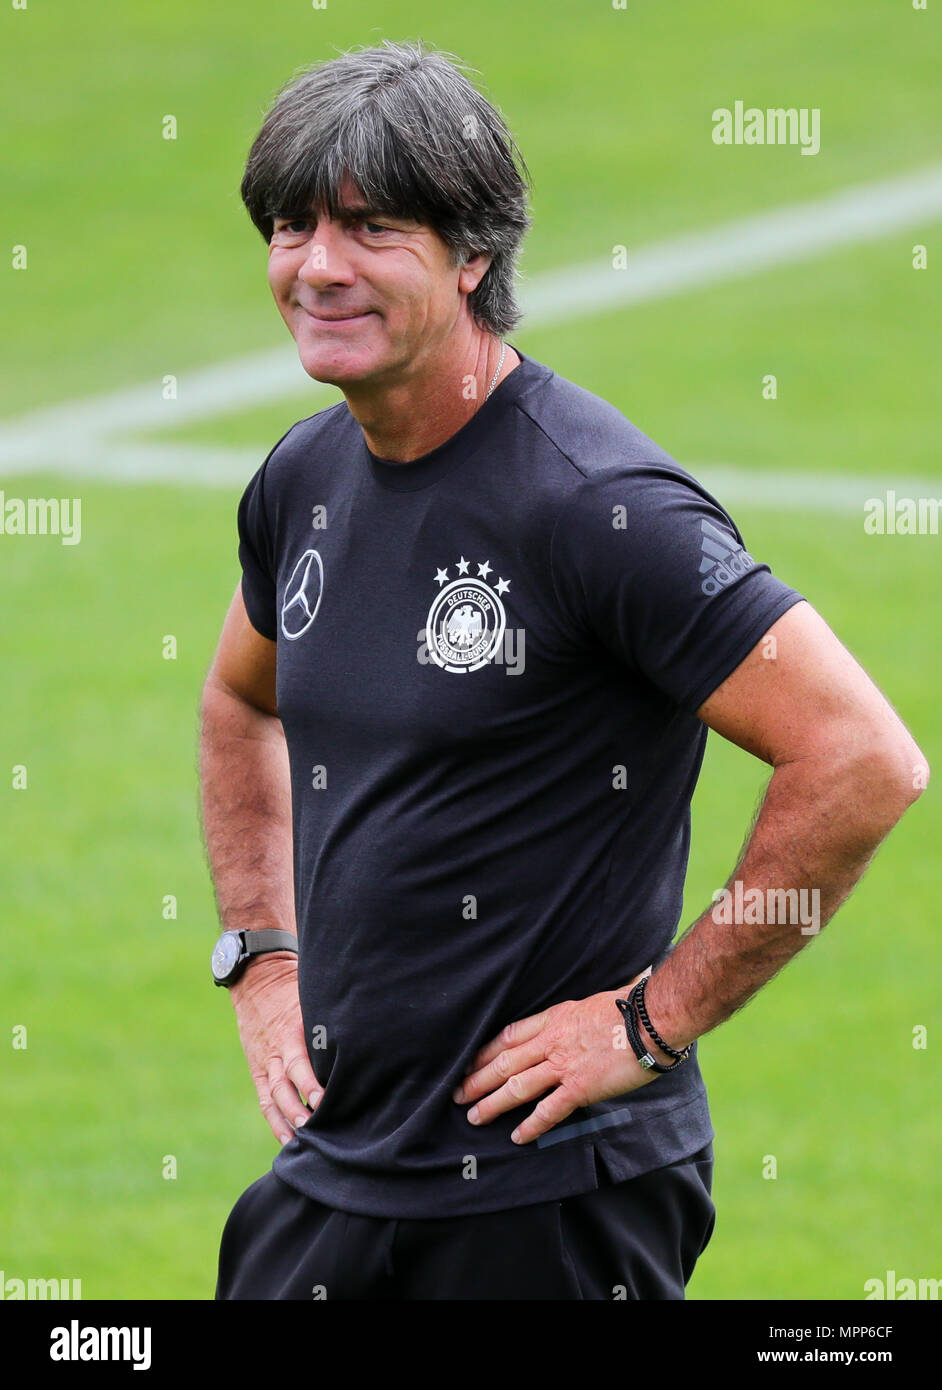 24 May 2018, Italy, Eppan: Germany coach Joachim Loew during training at  the Rungg sports centre. The Germany football team is preparing for the  football World Cup at their training camp in